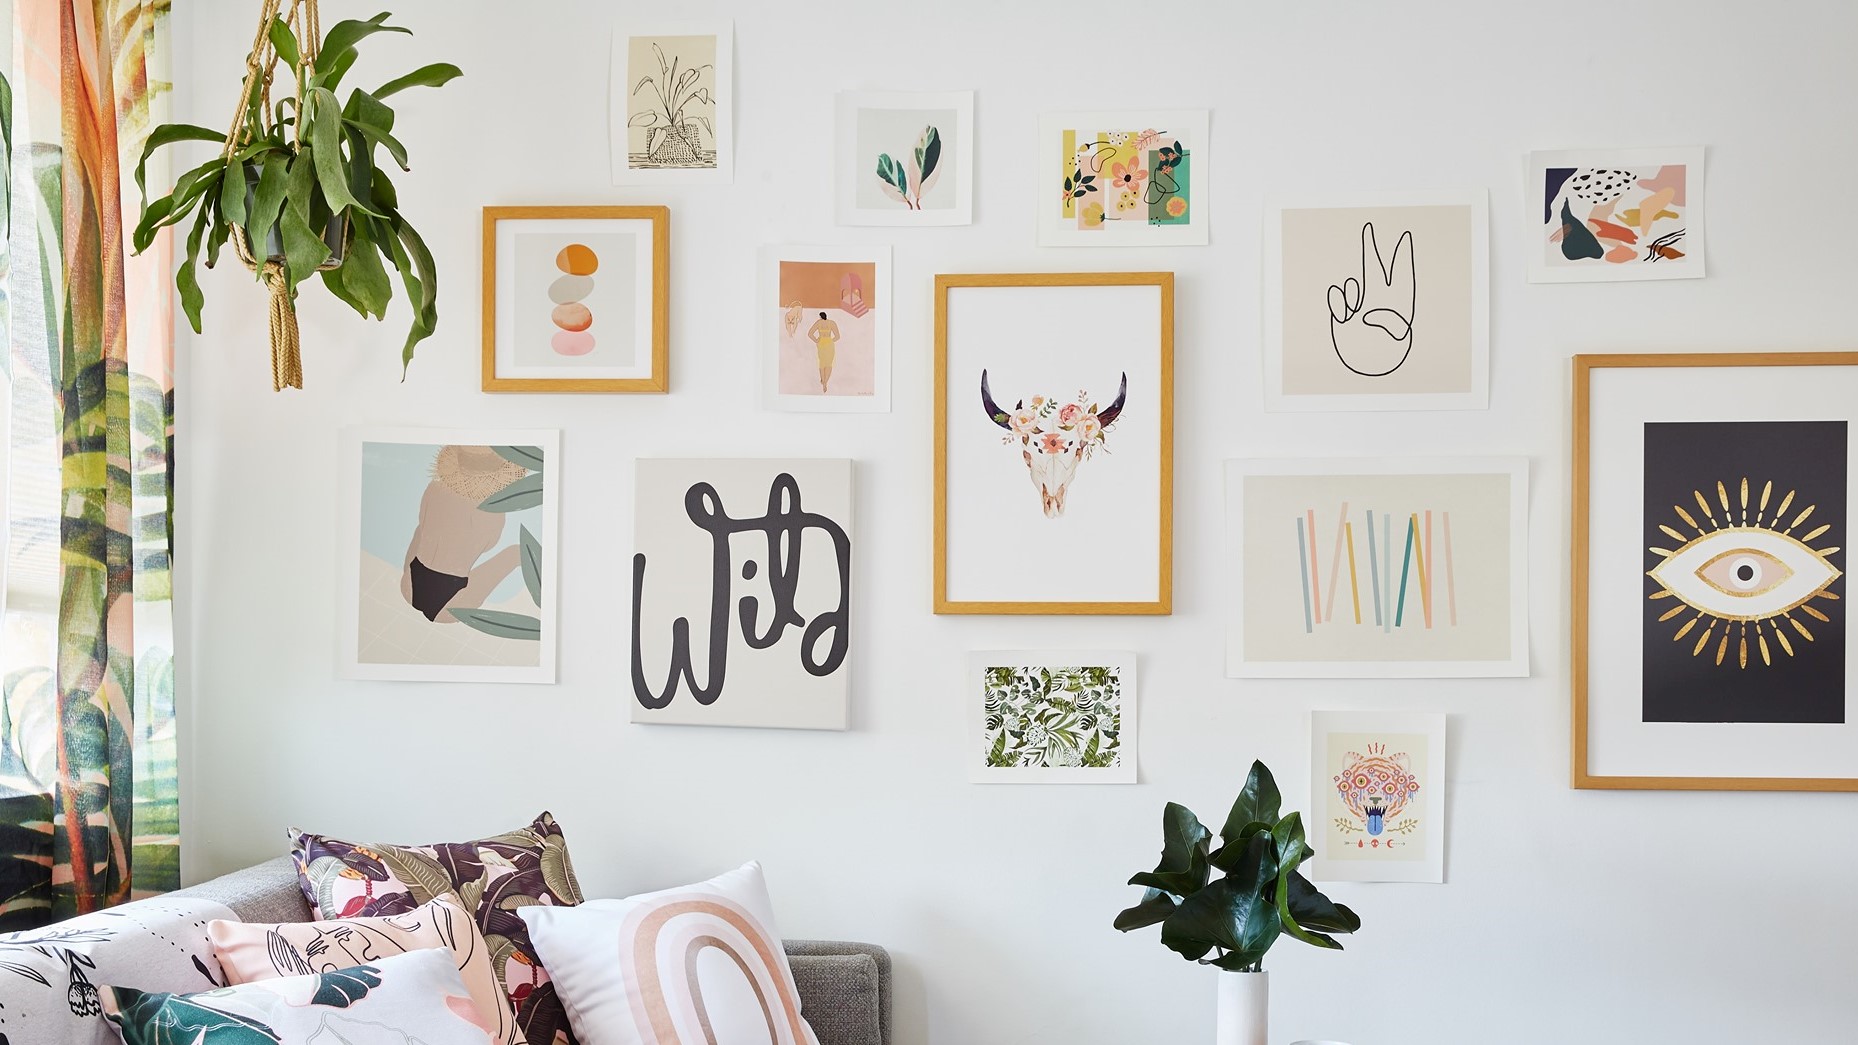 Society6’s Epic Wall Art Sale is Chock Full of Chic Dorm Décor Staples